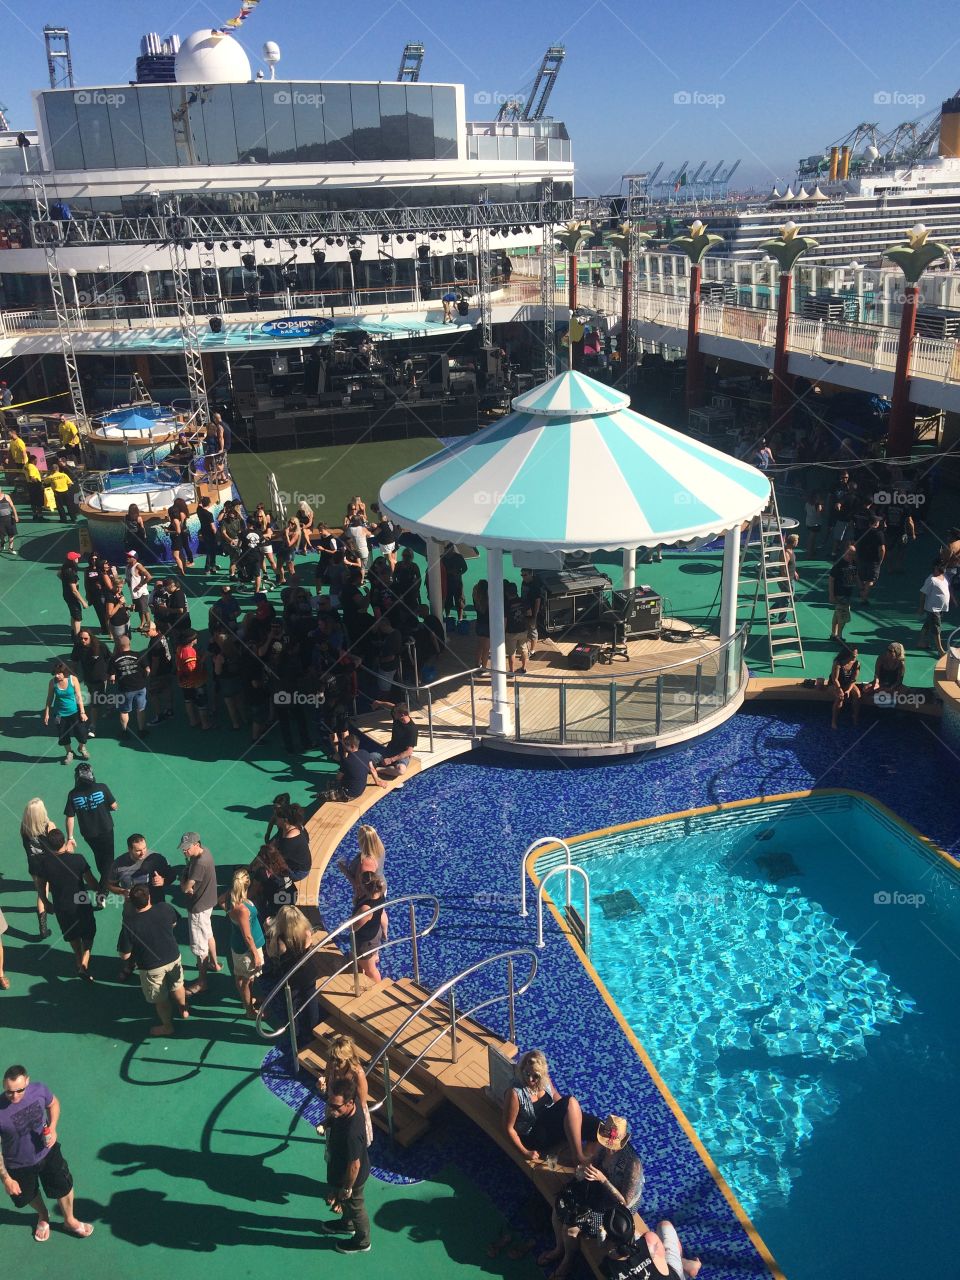 The upper deck of this cruise ship is buzzing with activity: from swimmers in the pool to dancing to the beat of a DJ, everyone was having fun.